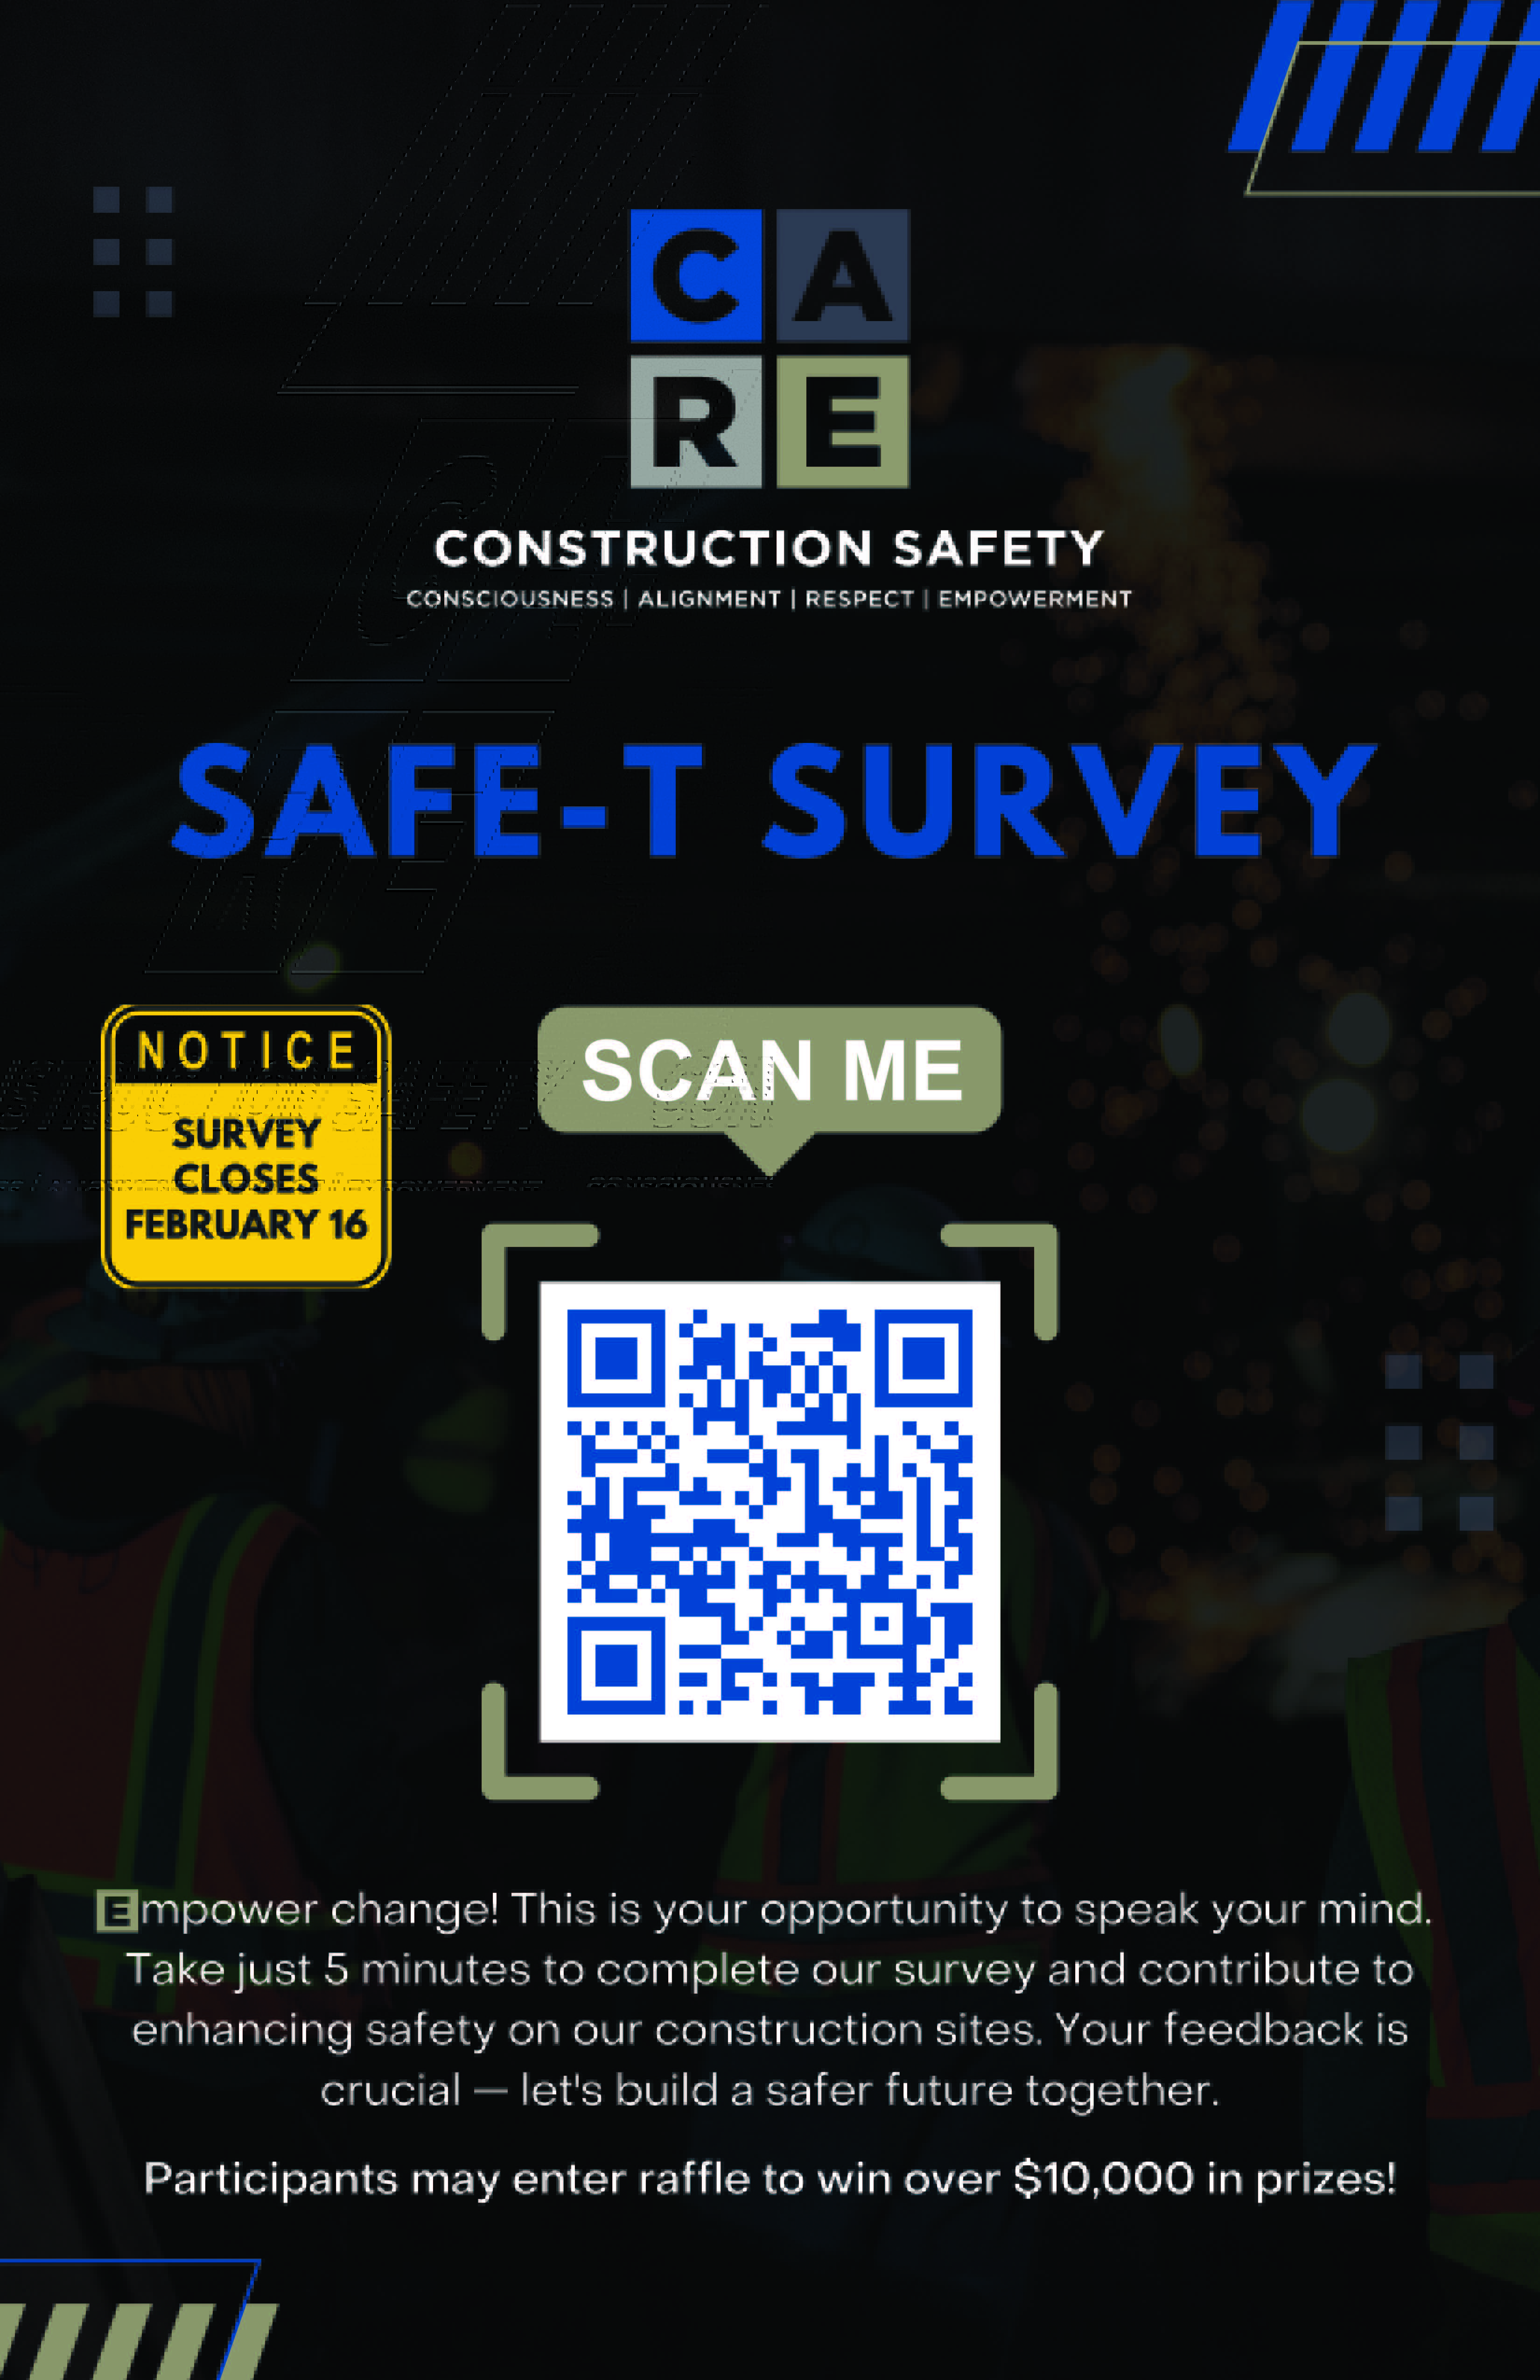 CARE Safety Survey Poster (11 x 17 in) (1)